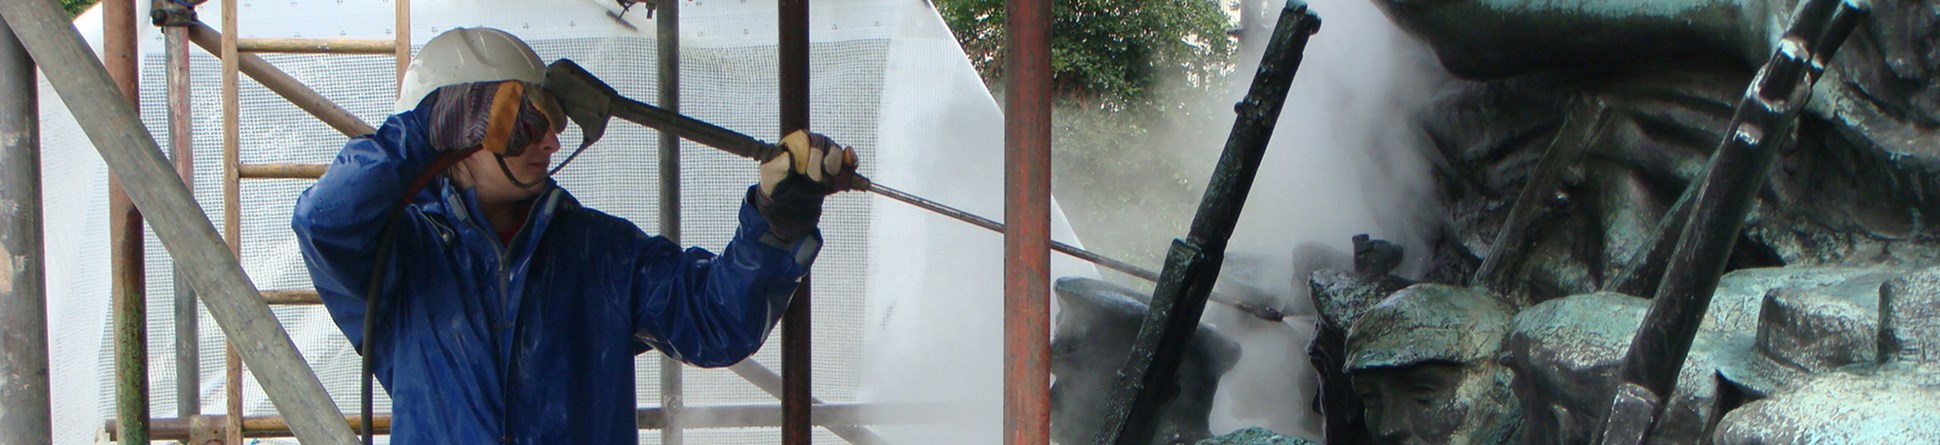 Image showing the cleaning of bronze statuary on a a war memorial with super-heated water.